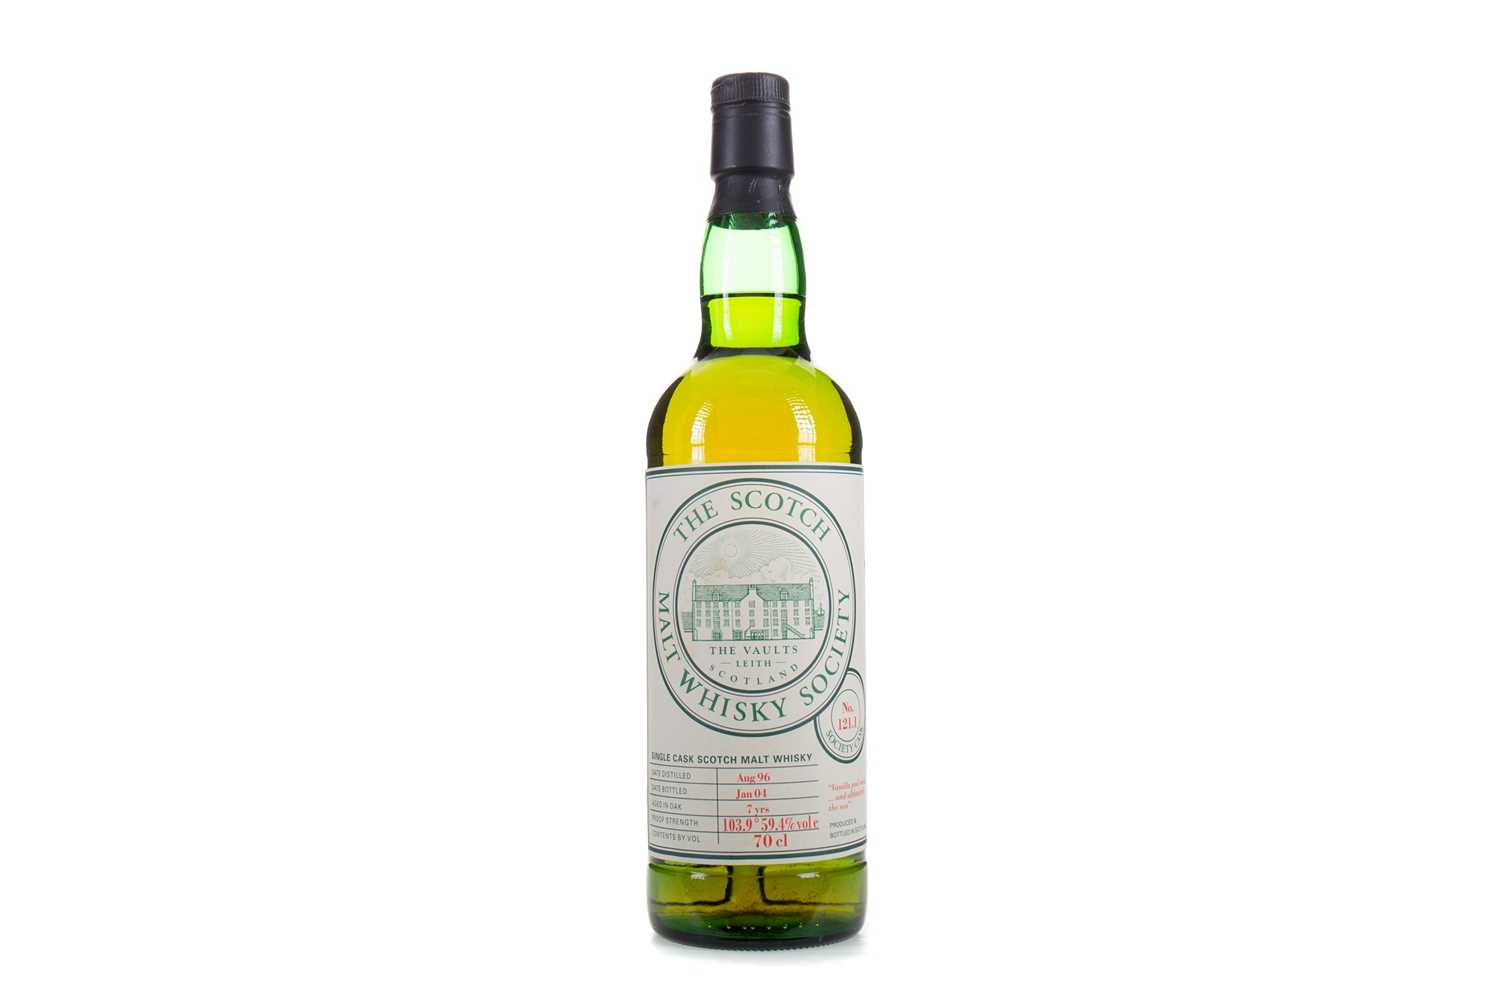 Lot 503 - SMWS 121.1 ARRAN 1996 7 YEAR OLD